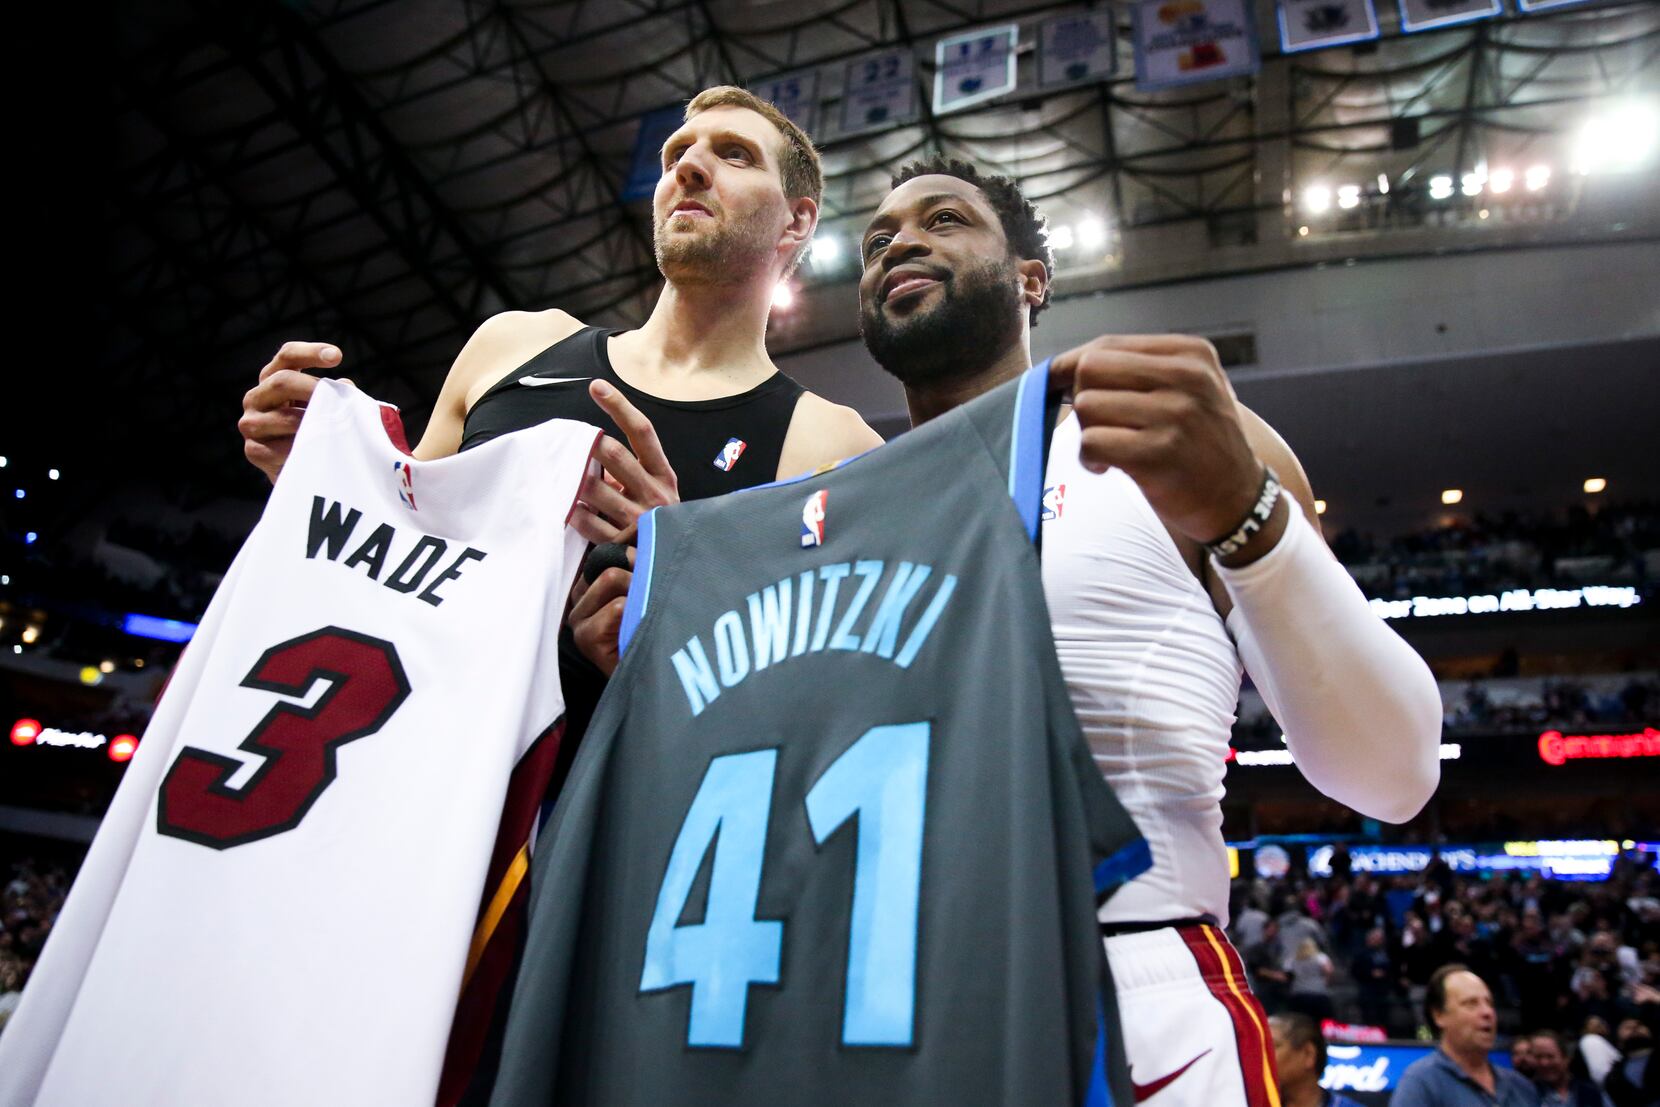 Dwyane Wade's jersey swap collection is already hilariously out of